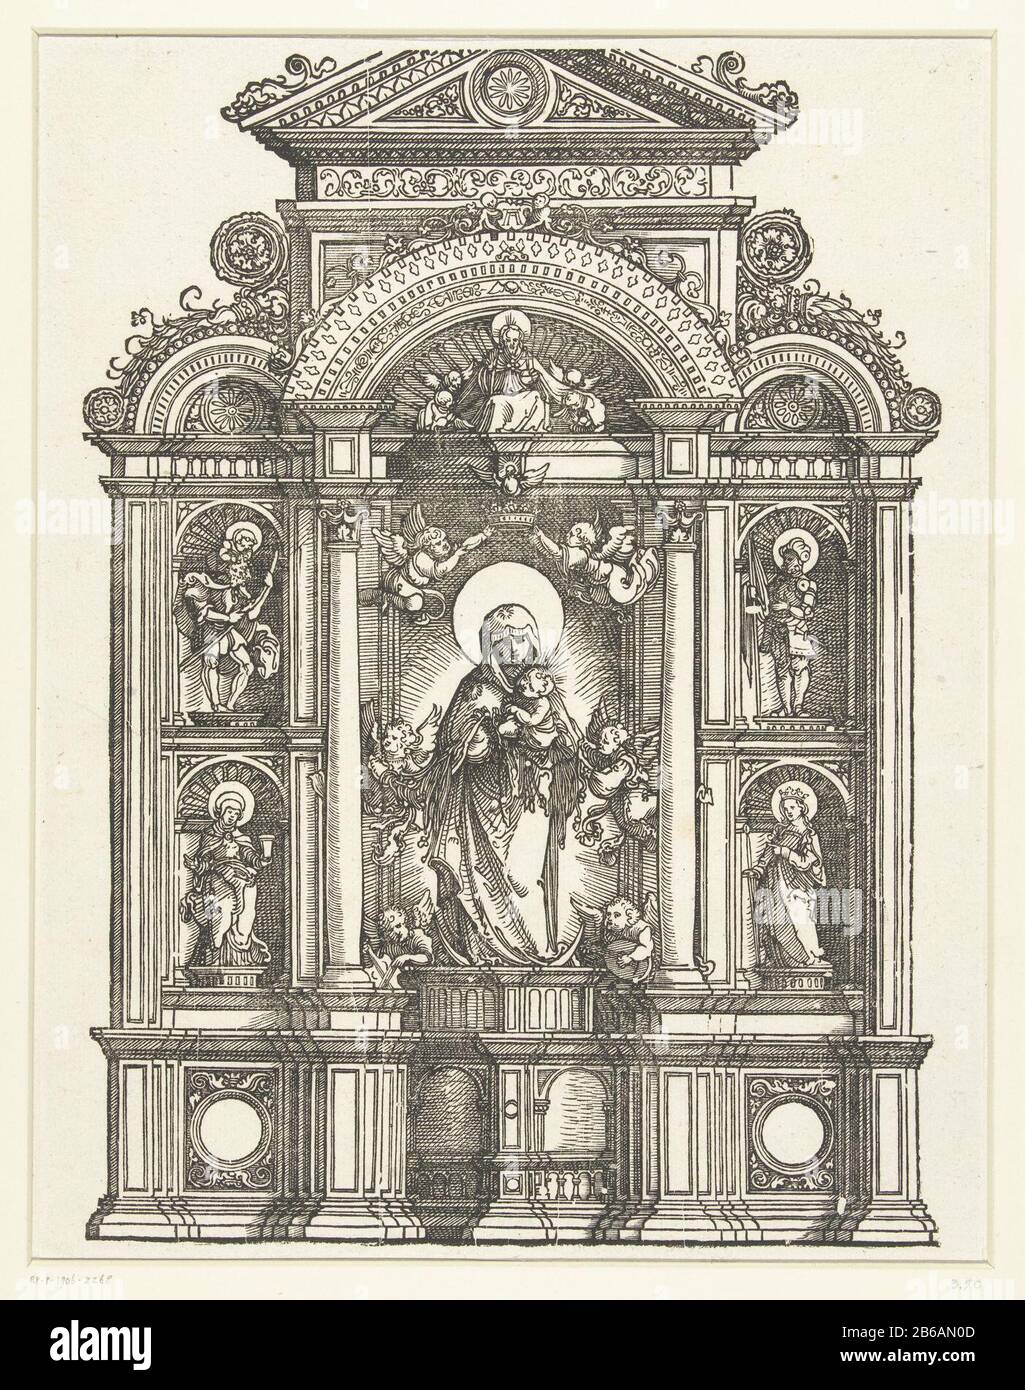 An altar in the middle Mary with the Christ child in an alcove, surrounded by six angels Where: keeping two a crown above her head. Moreover, the Holy Spirit and God the Father. Links Saint Christopher and Mary Magdalene in a niche, right St. Florian and St. Catharina. Manufacturer : printmaker Albrecht Altdorfer (listed property) Place manufacture: Germany Date: ca. 1506 - 1538 Physical features: woodcut material: paper Technique: woodcut dimensions: sheet: h 305 mm × W 235 mm Subject: mary altar standing (or half-length), the Christ-child sitting on her arm (Christ-child to Mary's left) the Stock Photo